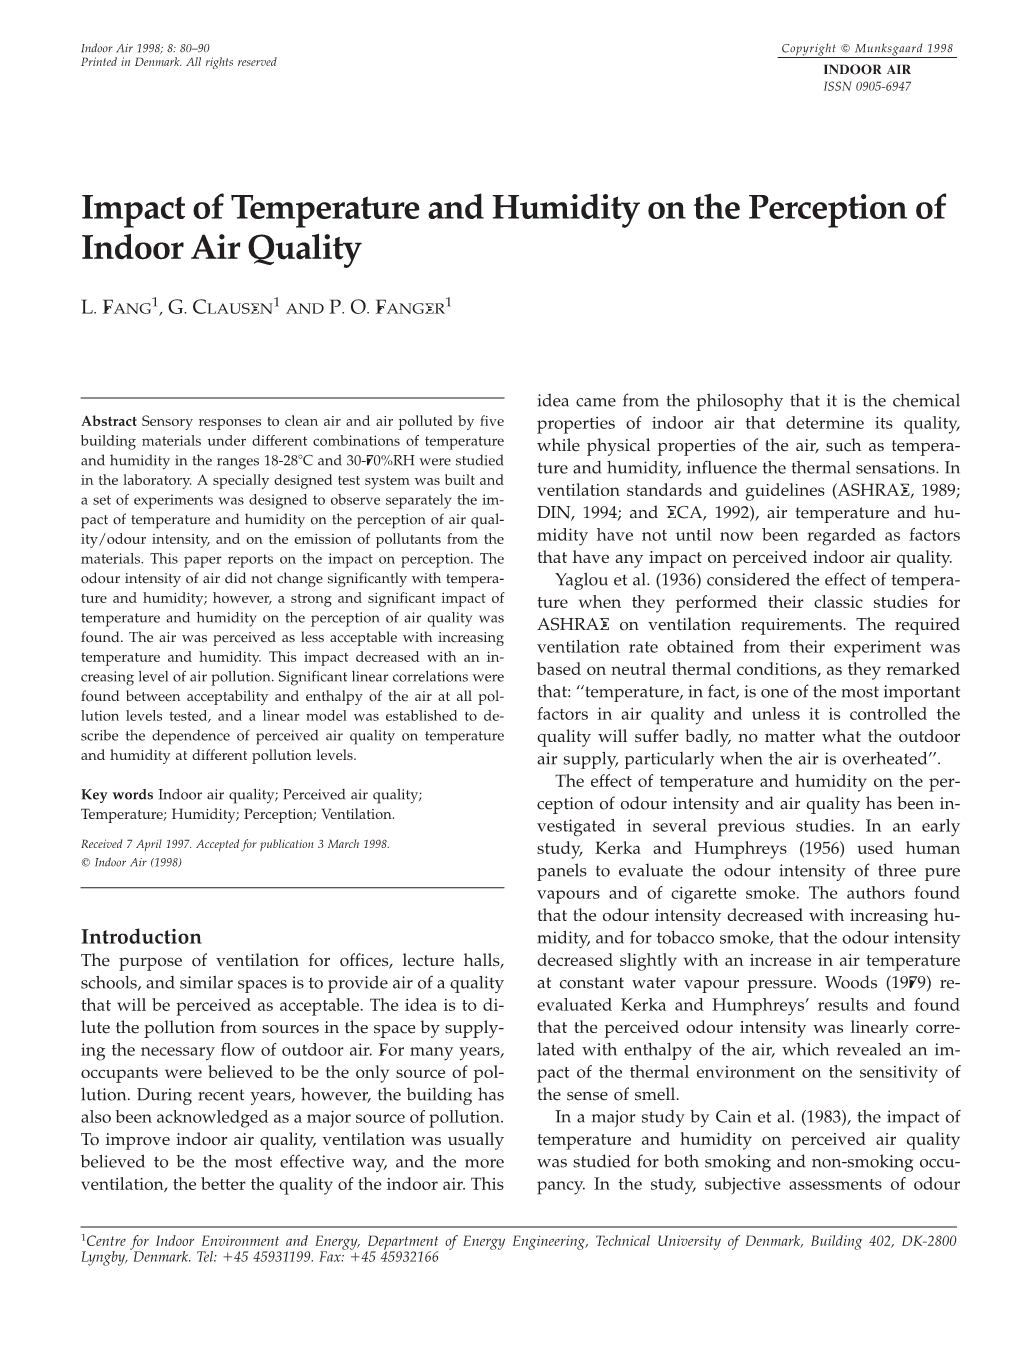 Impact of Temperature and Humidity on the Perception of Indoor Air Quality